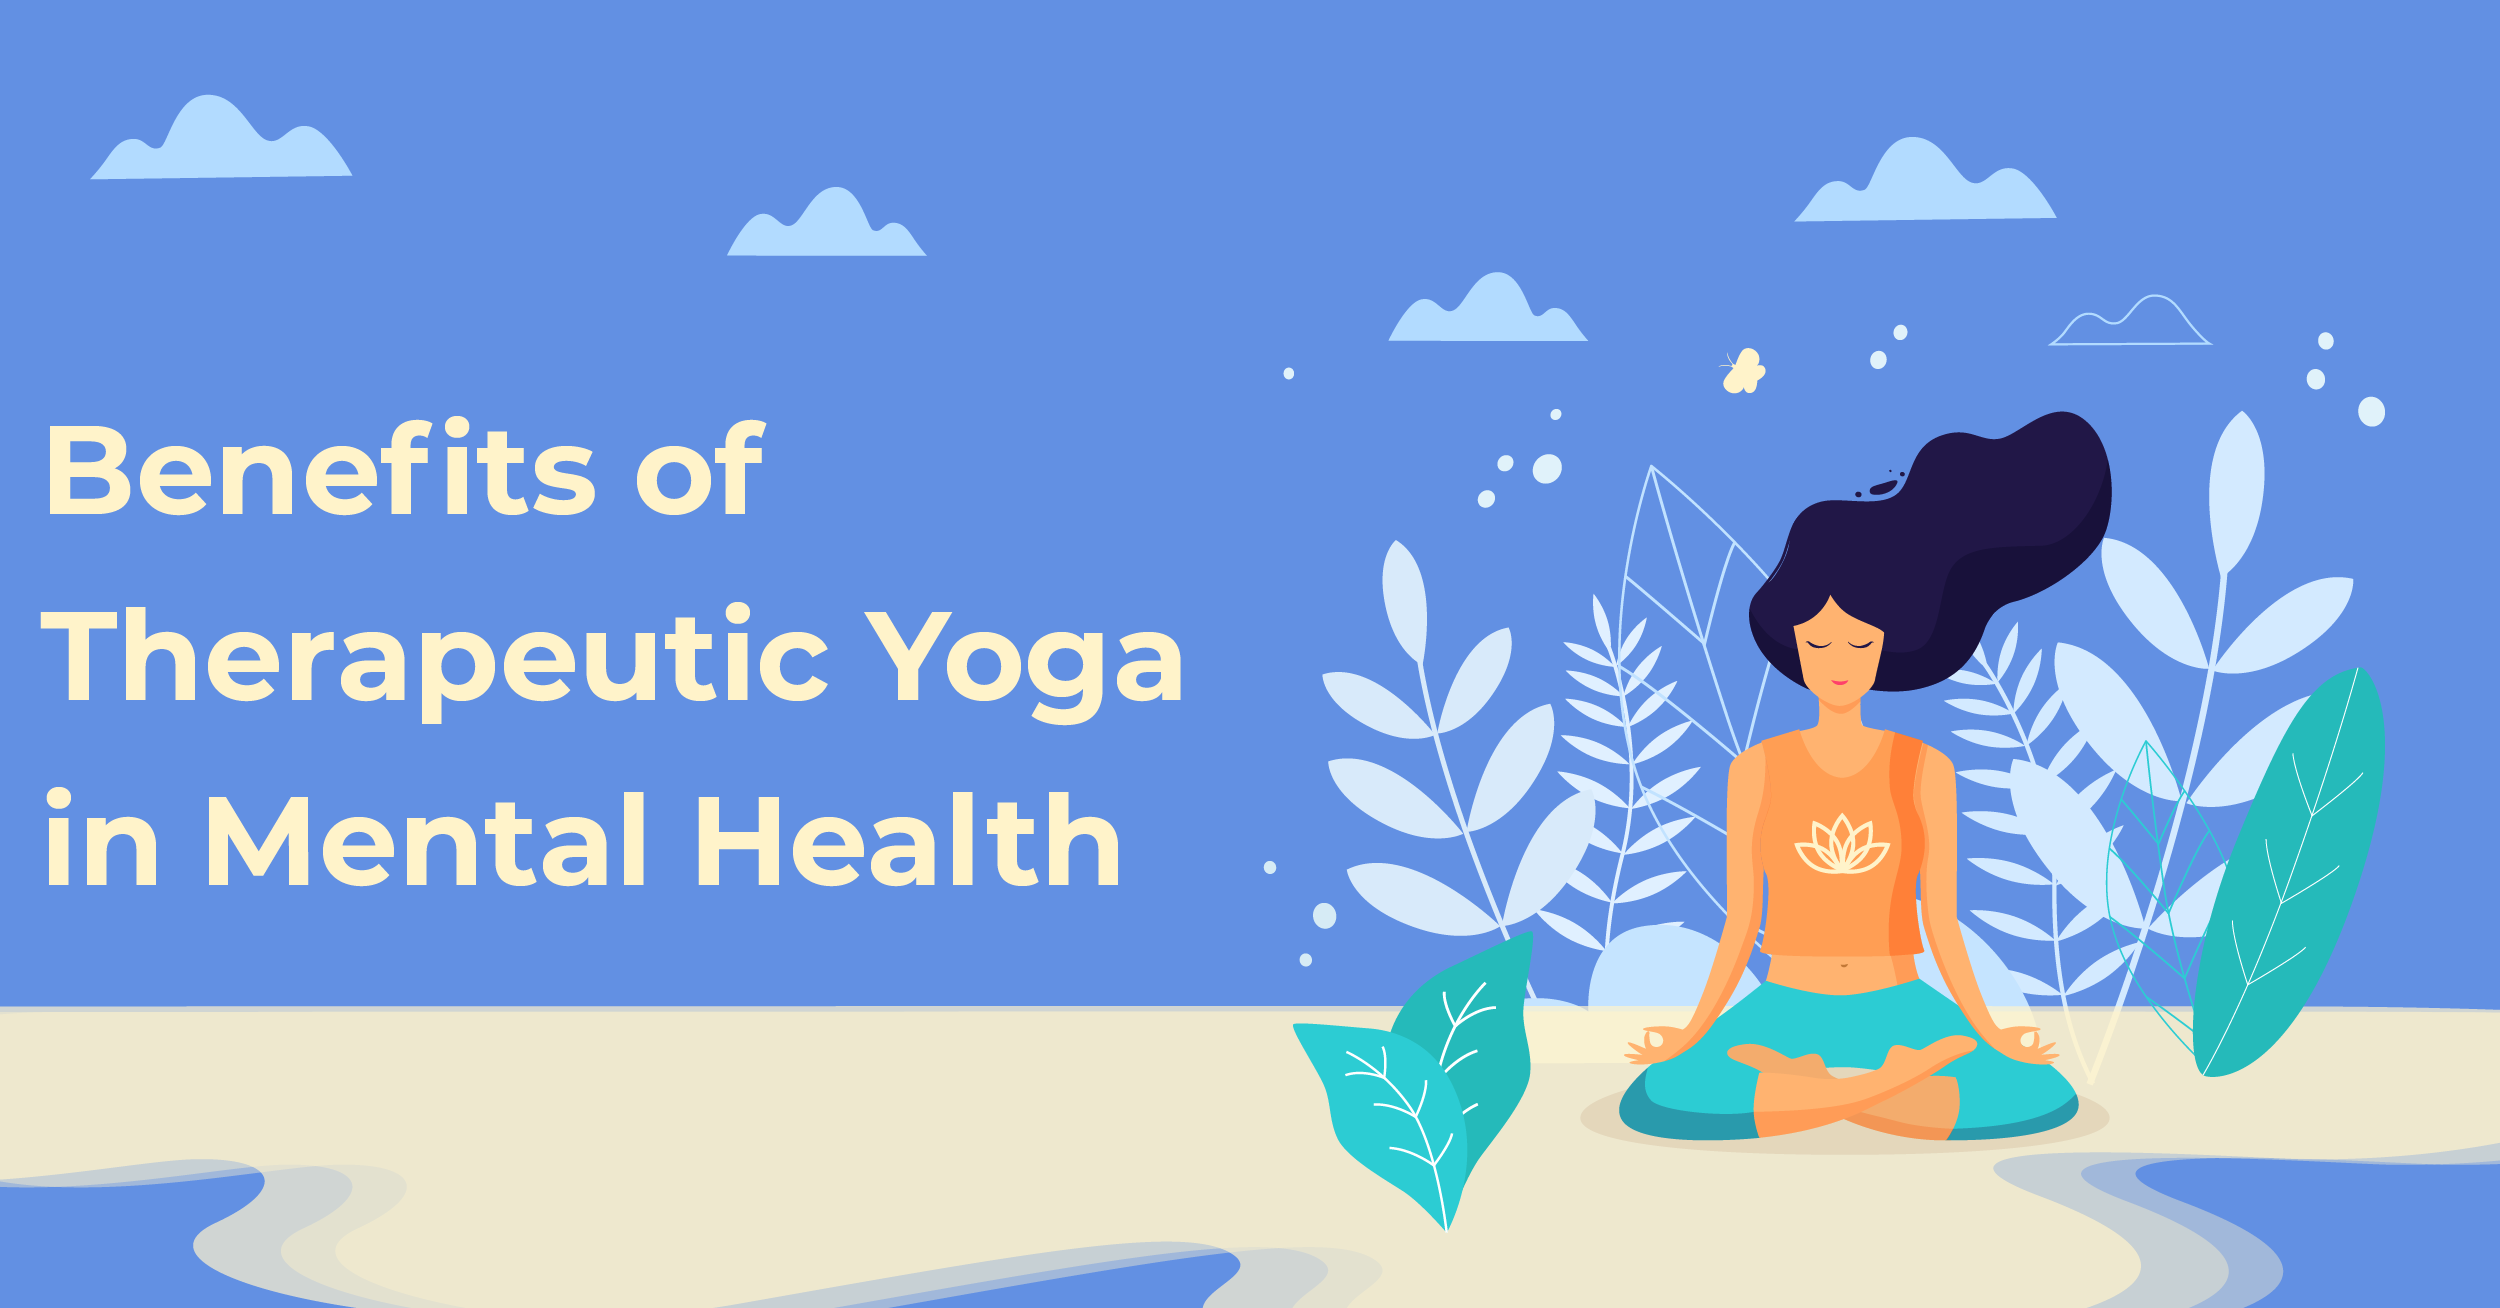 Benefits of Yoga Therapy  Yoga Therapy For Mental Health